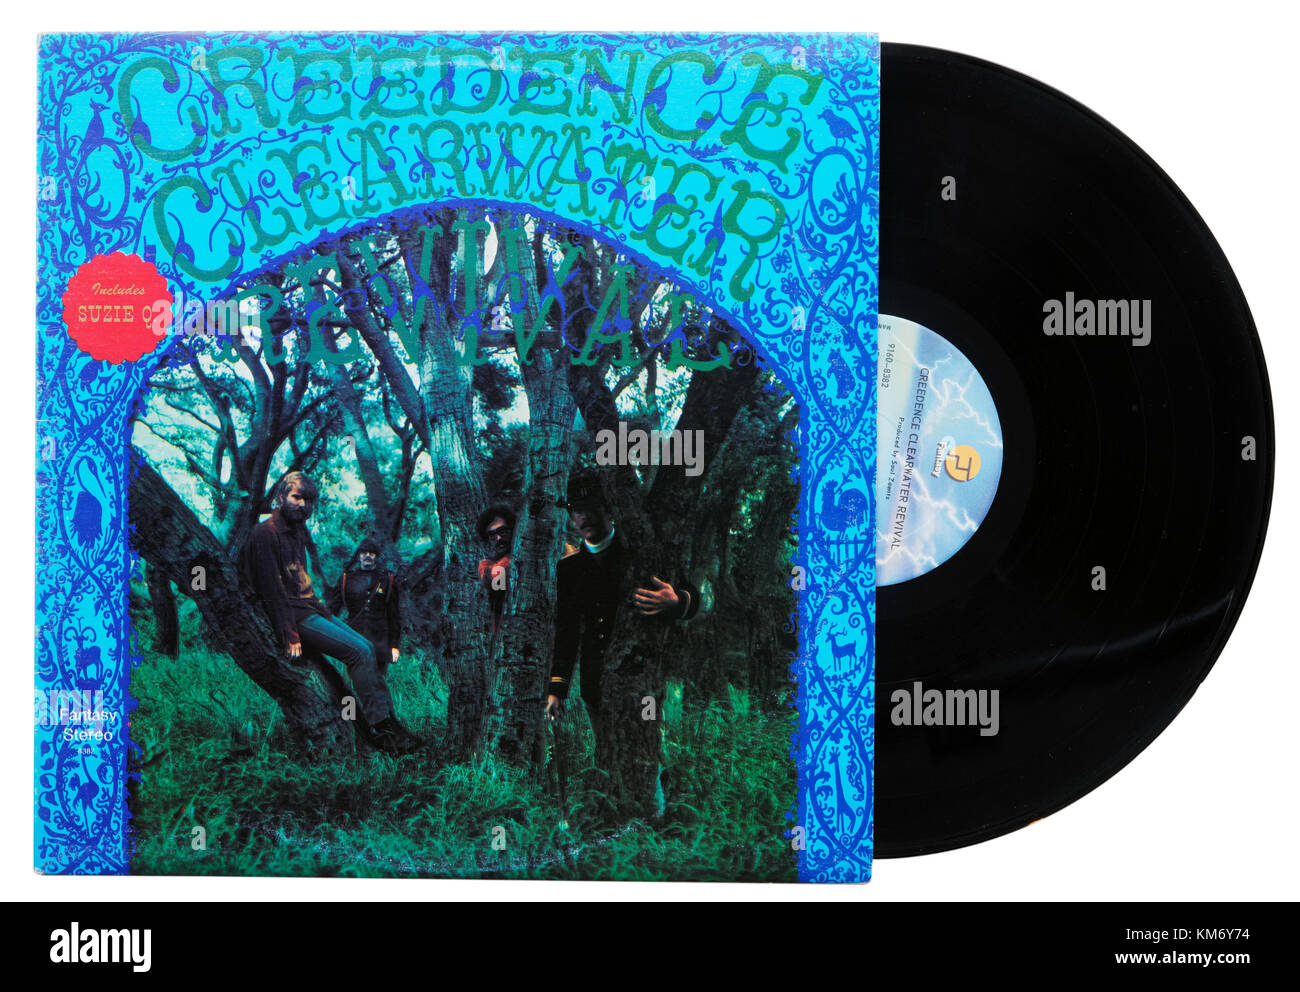 Creedence Clearwater Revival's erstes Album Creedence Clearwater Revival Stockfoto